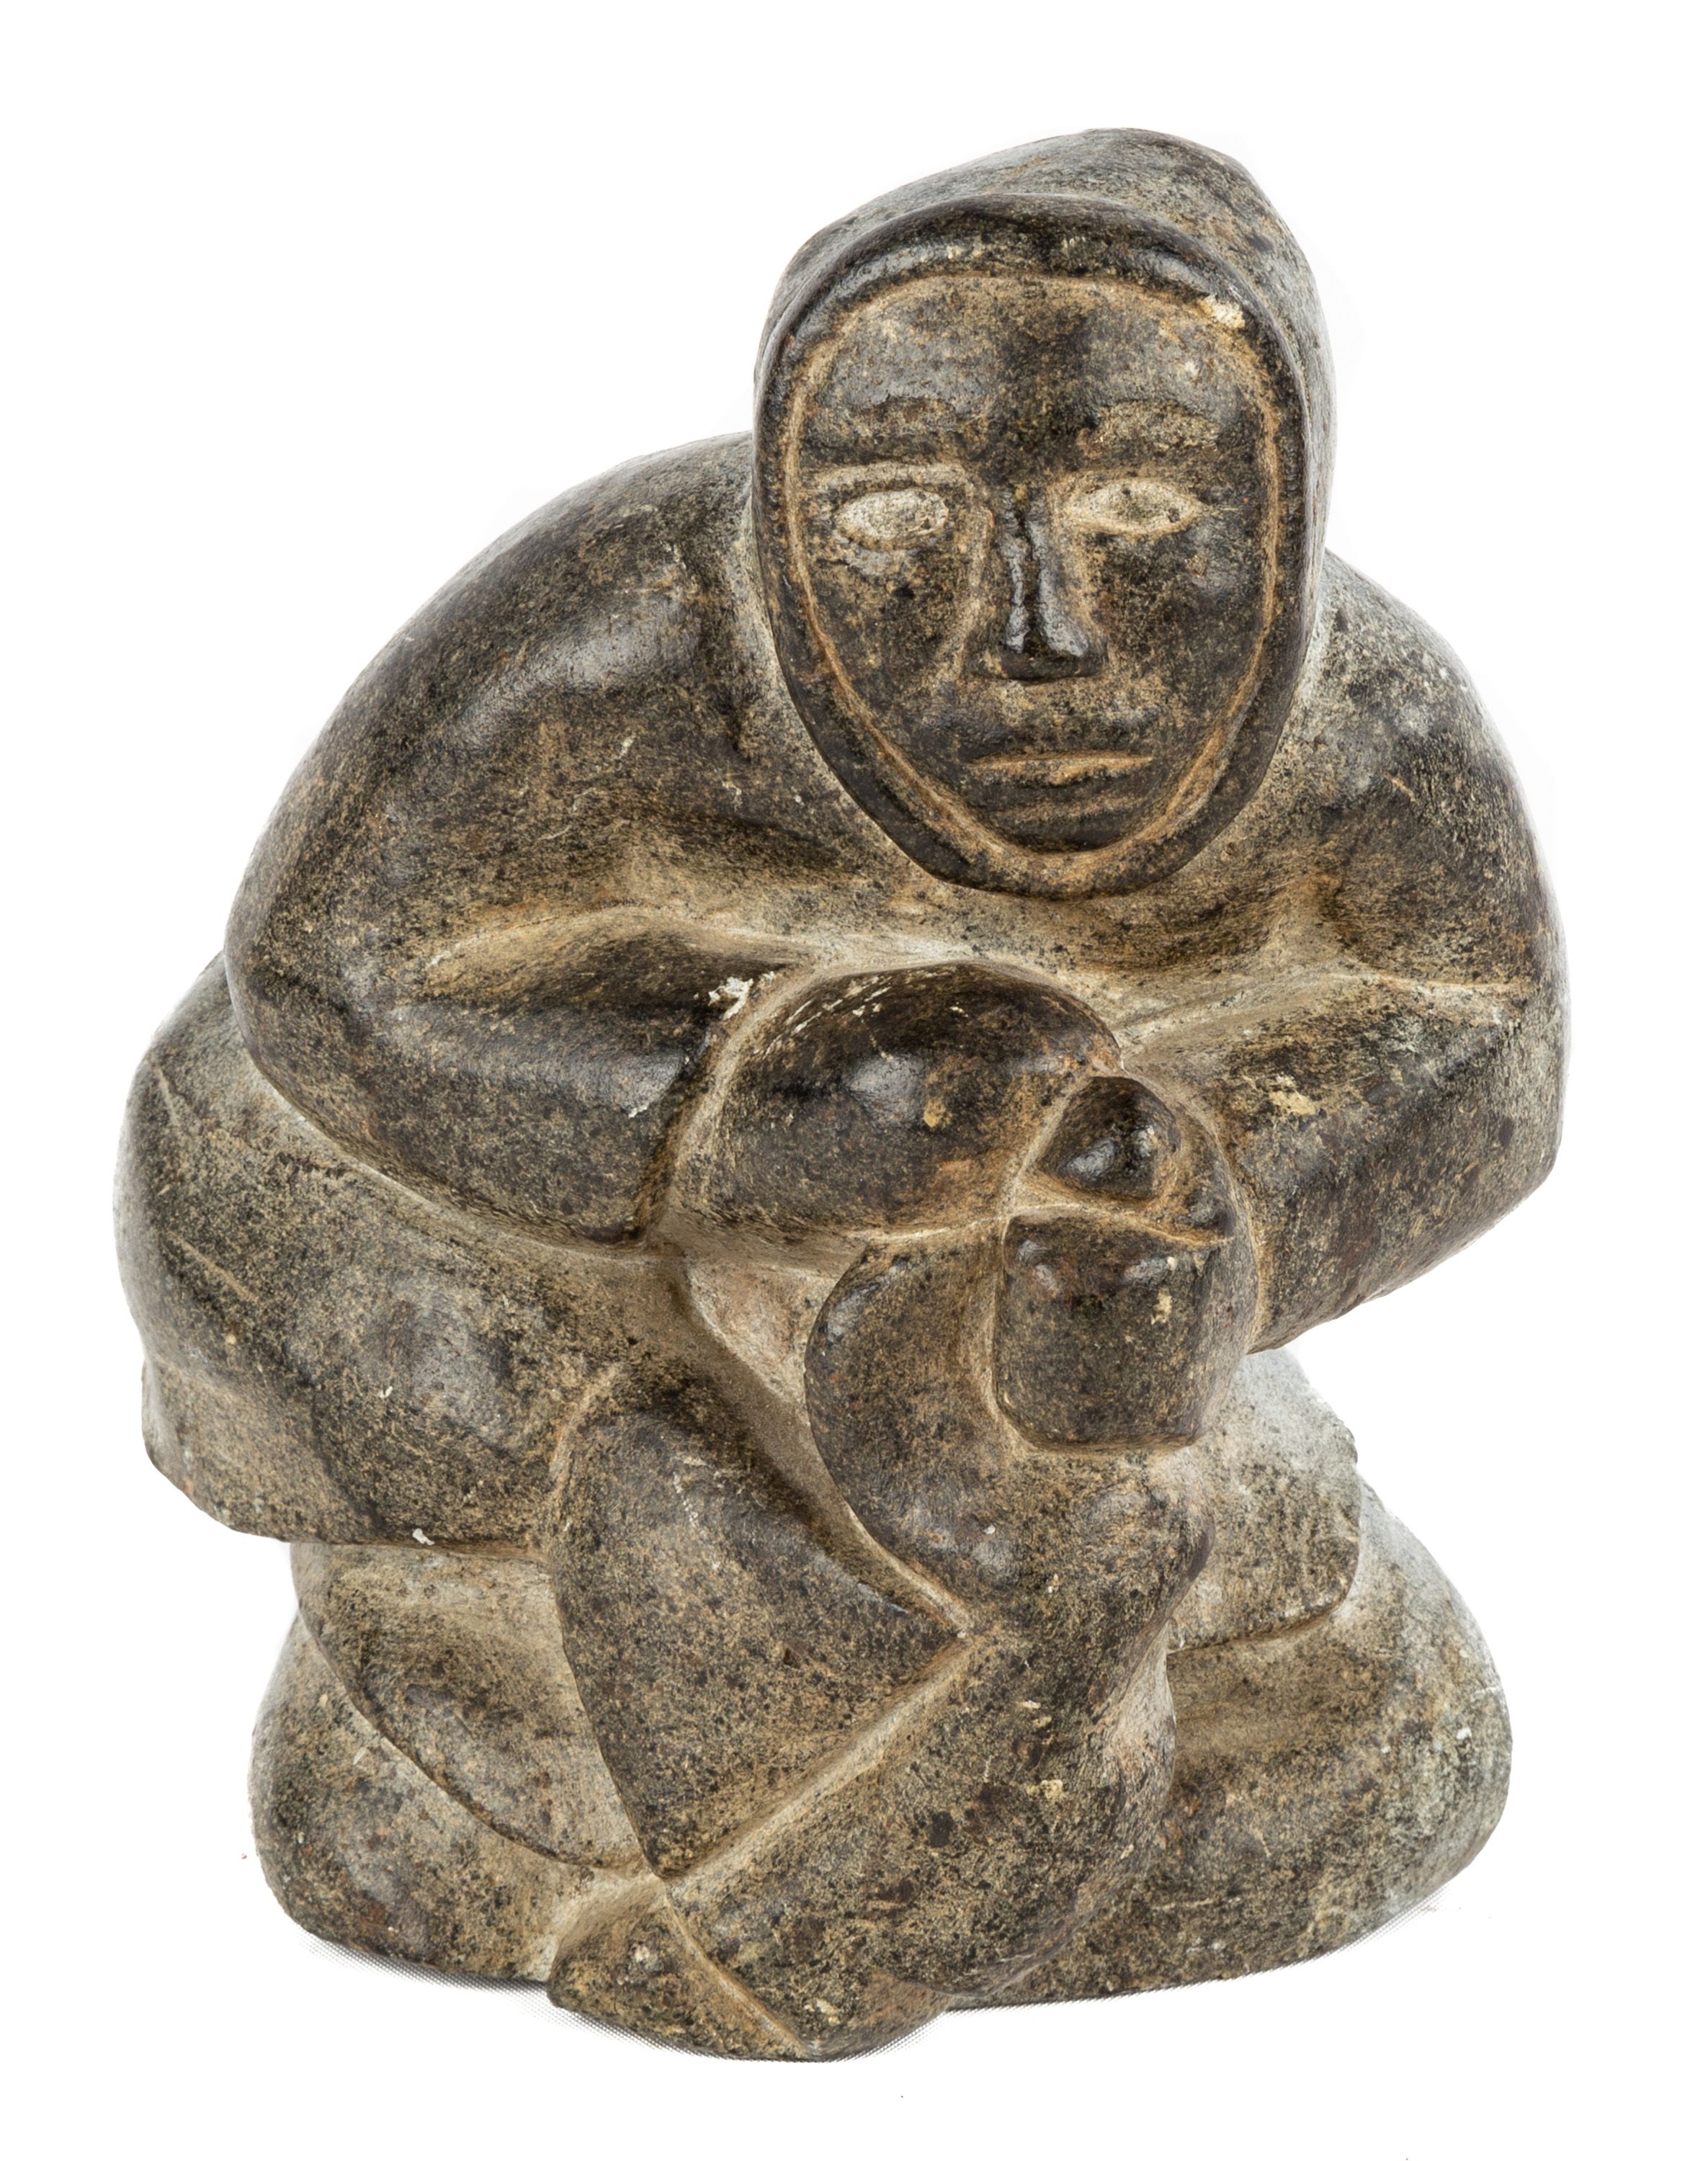 (2) Inuit Carved Stone Sculptures | Cottone Auctions